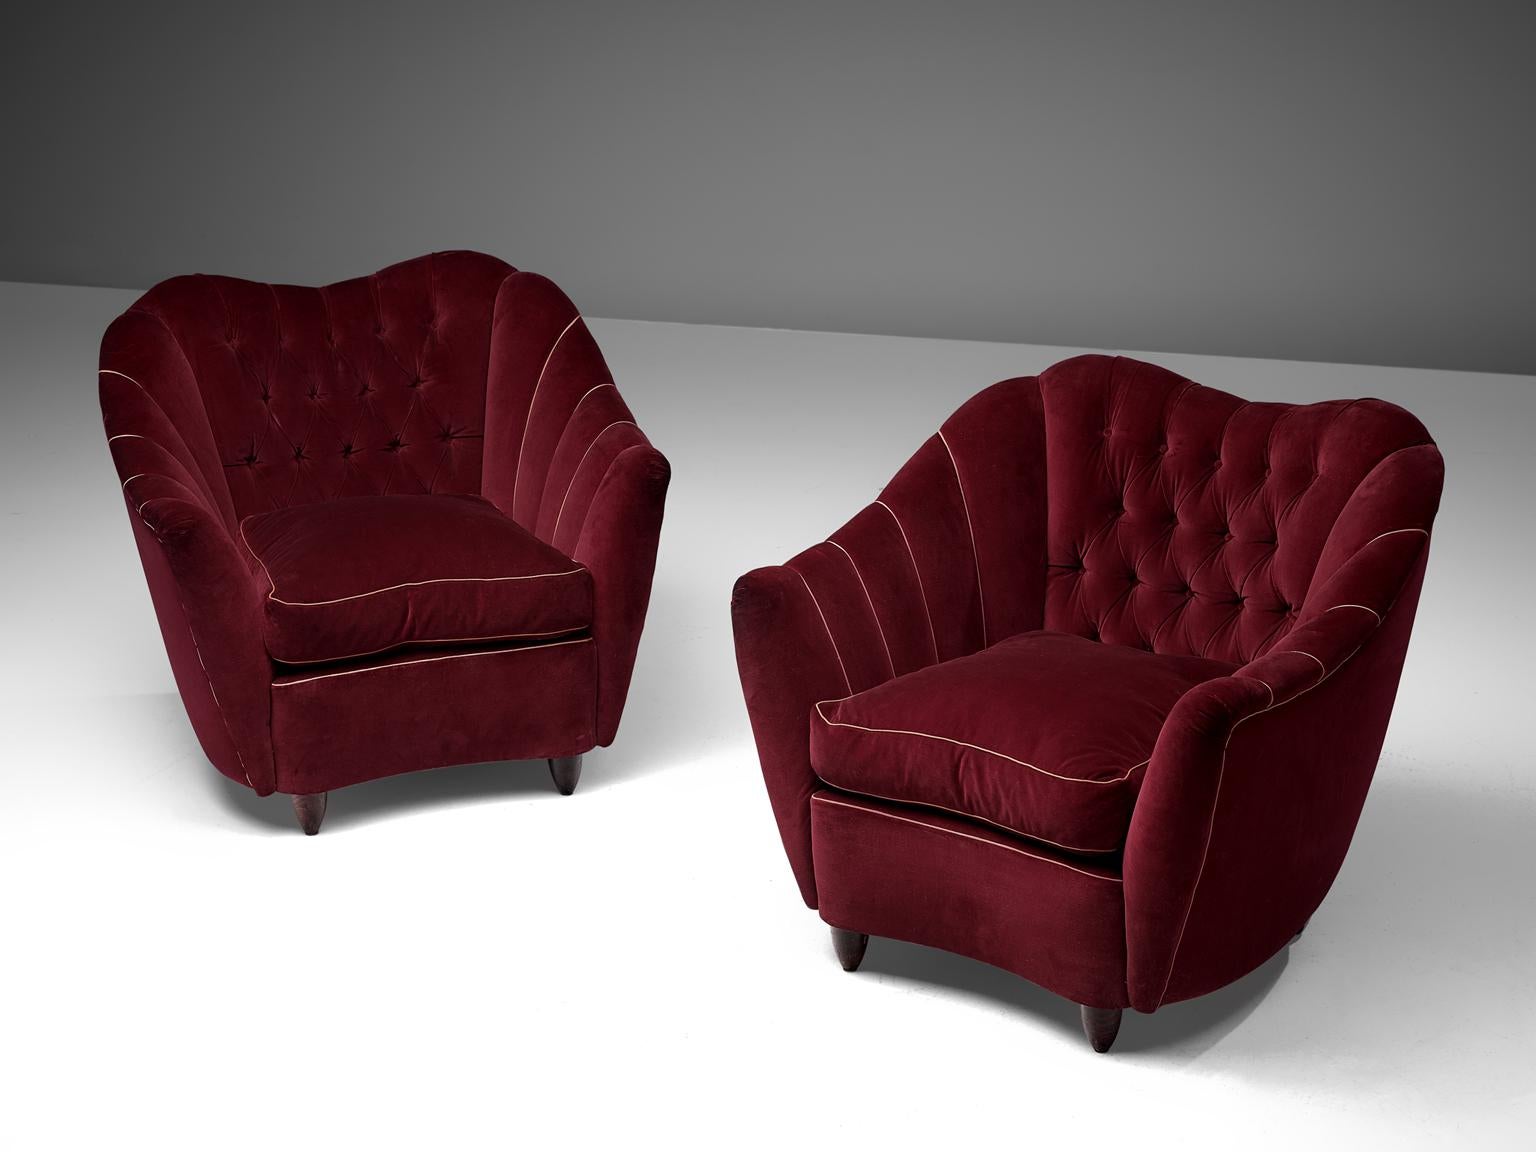 Pair of club chairs, velvet and wood, Italy, 1950s.

Theatrical set of lounge chairs being a wonderful example of Italian design from the 1950s. The chairs are bold and curvy, yet very elegant. The backrest is tufted and lined, which emphasizes